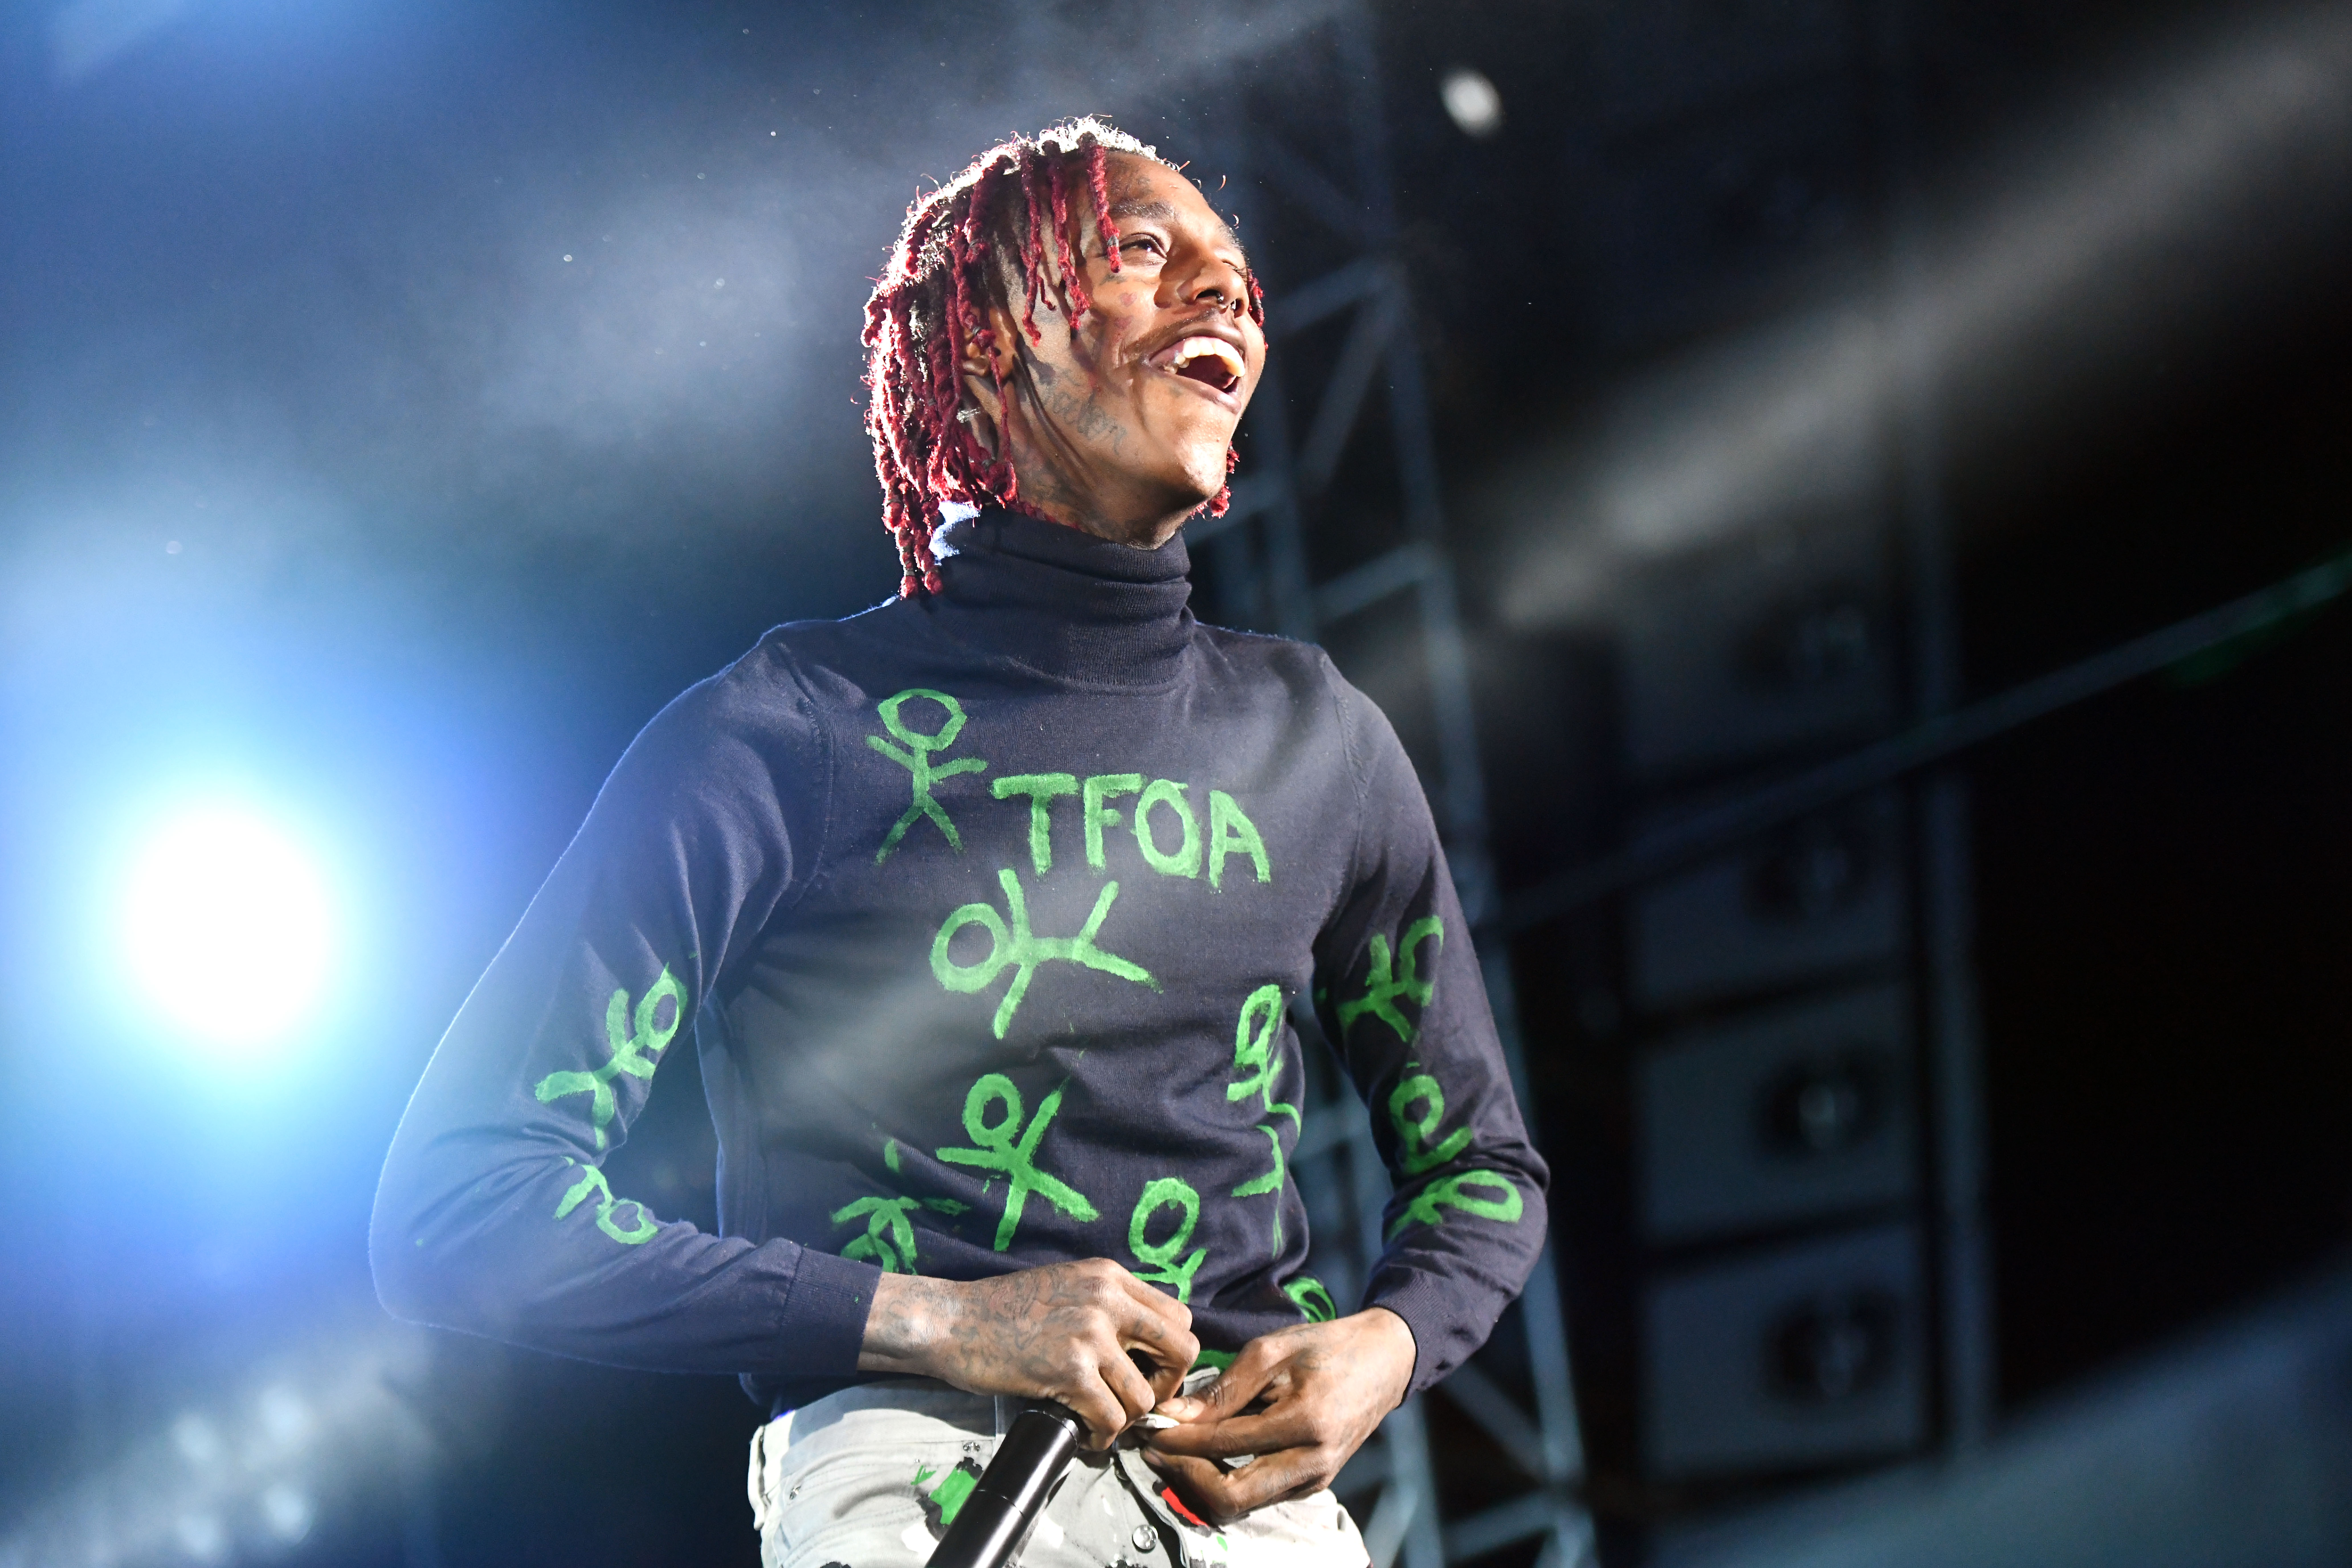 Famous Dex Robbed At Gunpoint For $50K Watch: Report